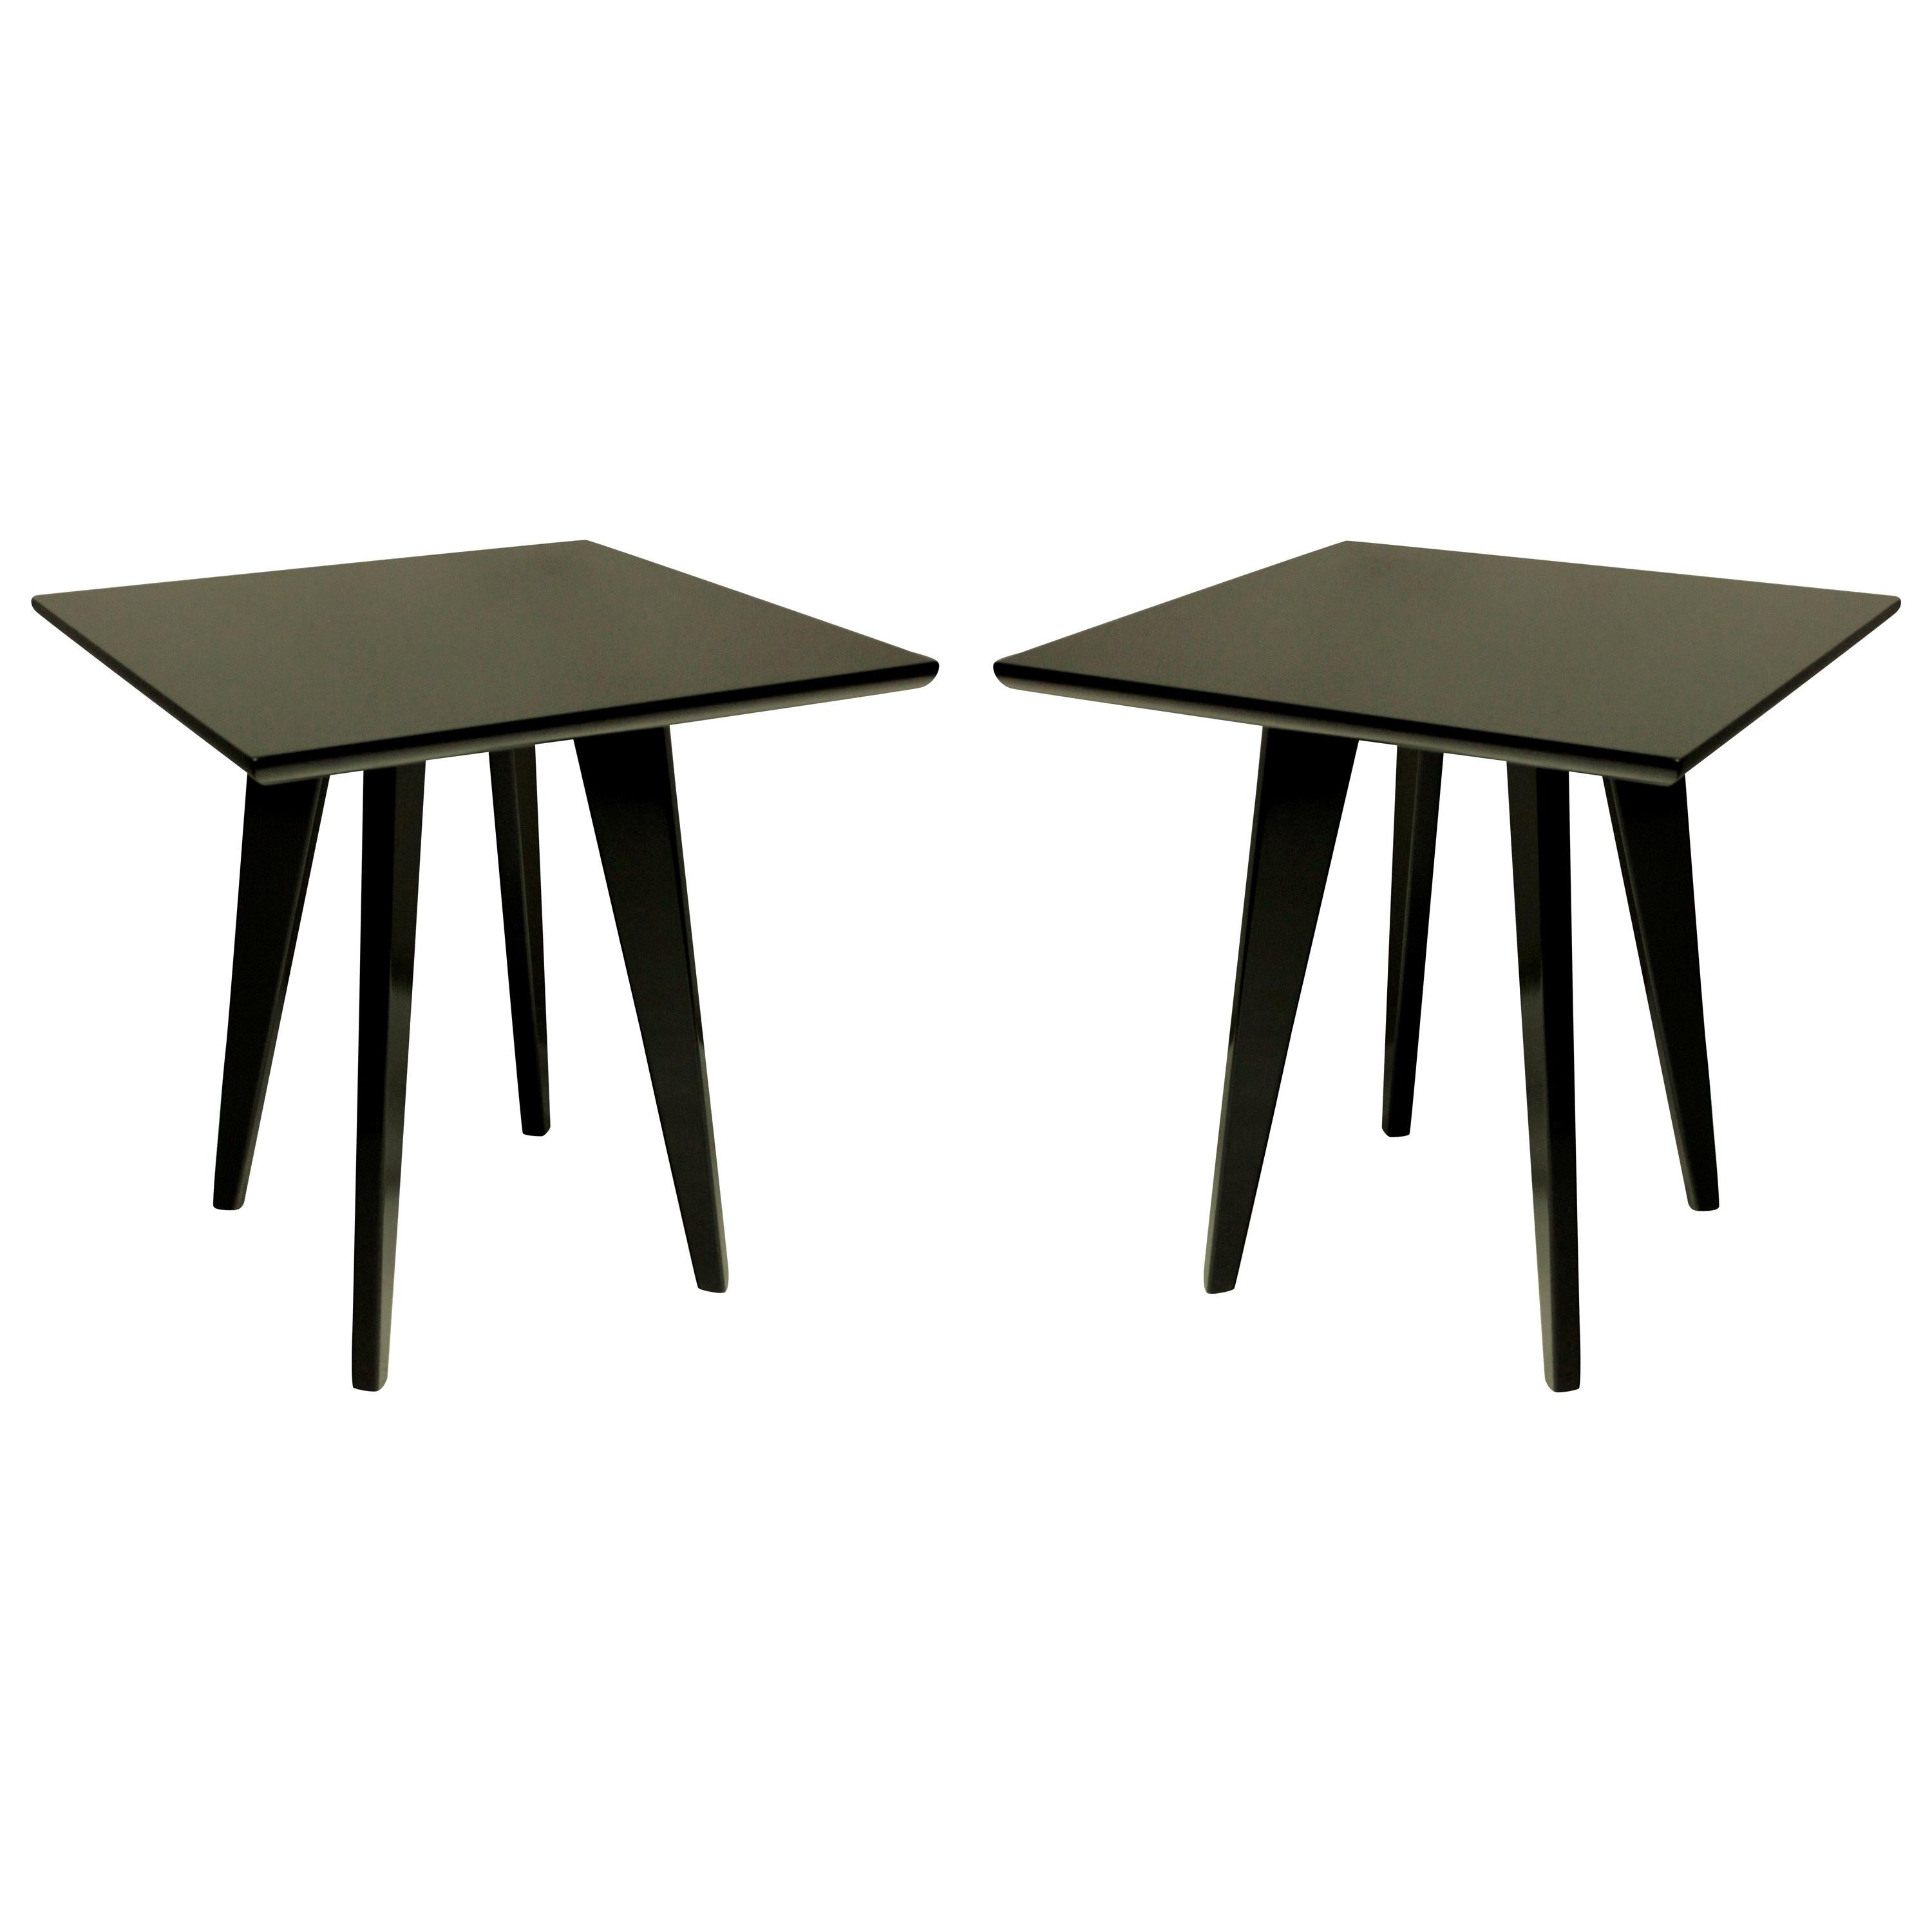 Pair of Sofa Tables in the Manner of Jeanneret